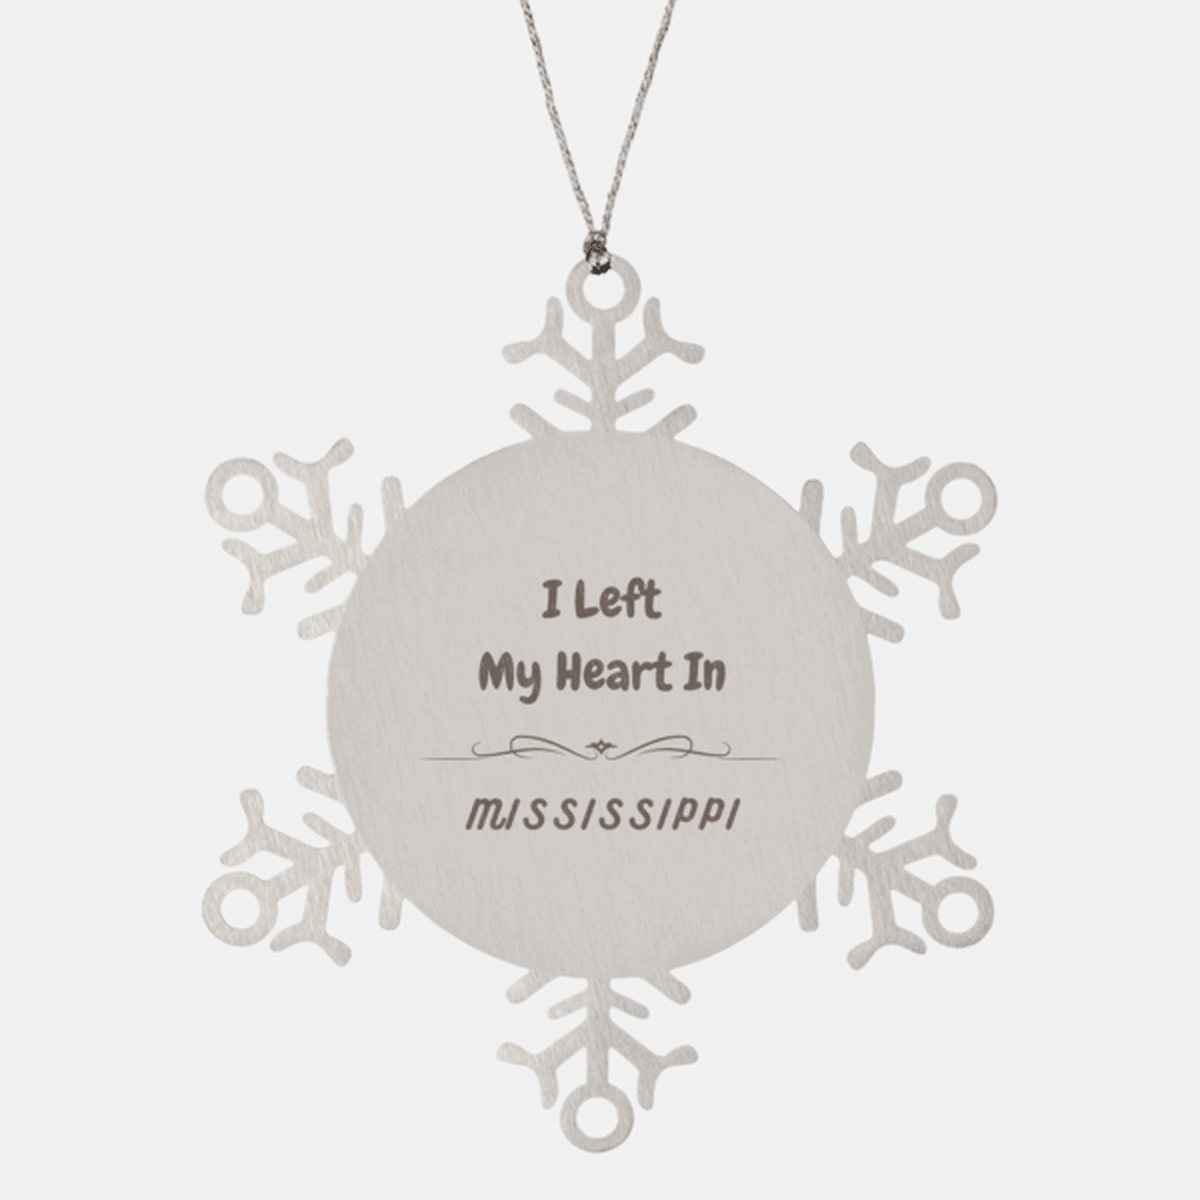 I Left My Heart In Mississippi Gifts, Meaningful Mississippi State for Friends, Men, Women. Snowflake Ornament for Mississippi People - Mallard Moon Gift Shop